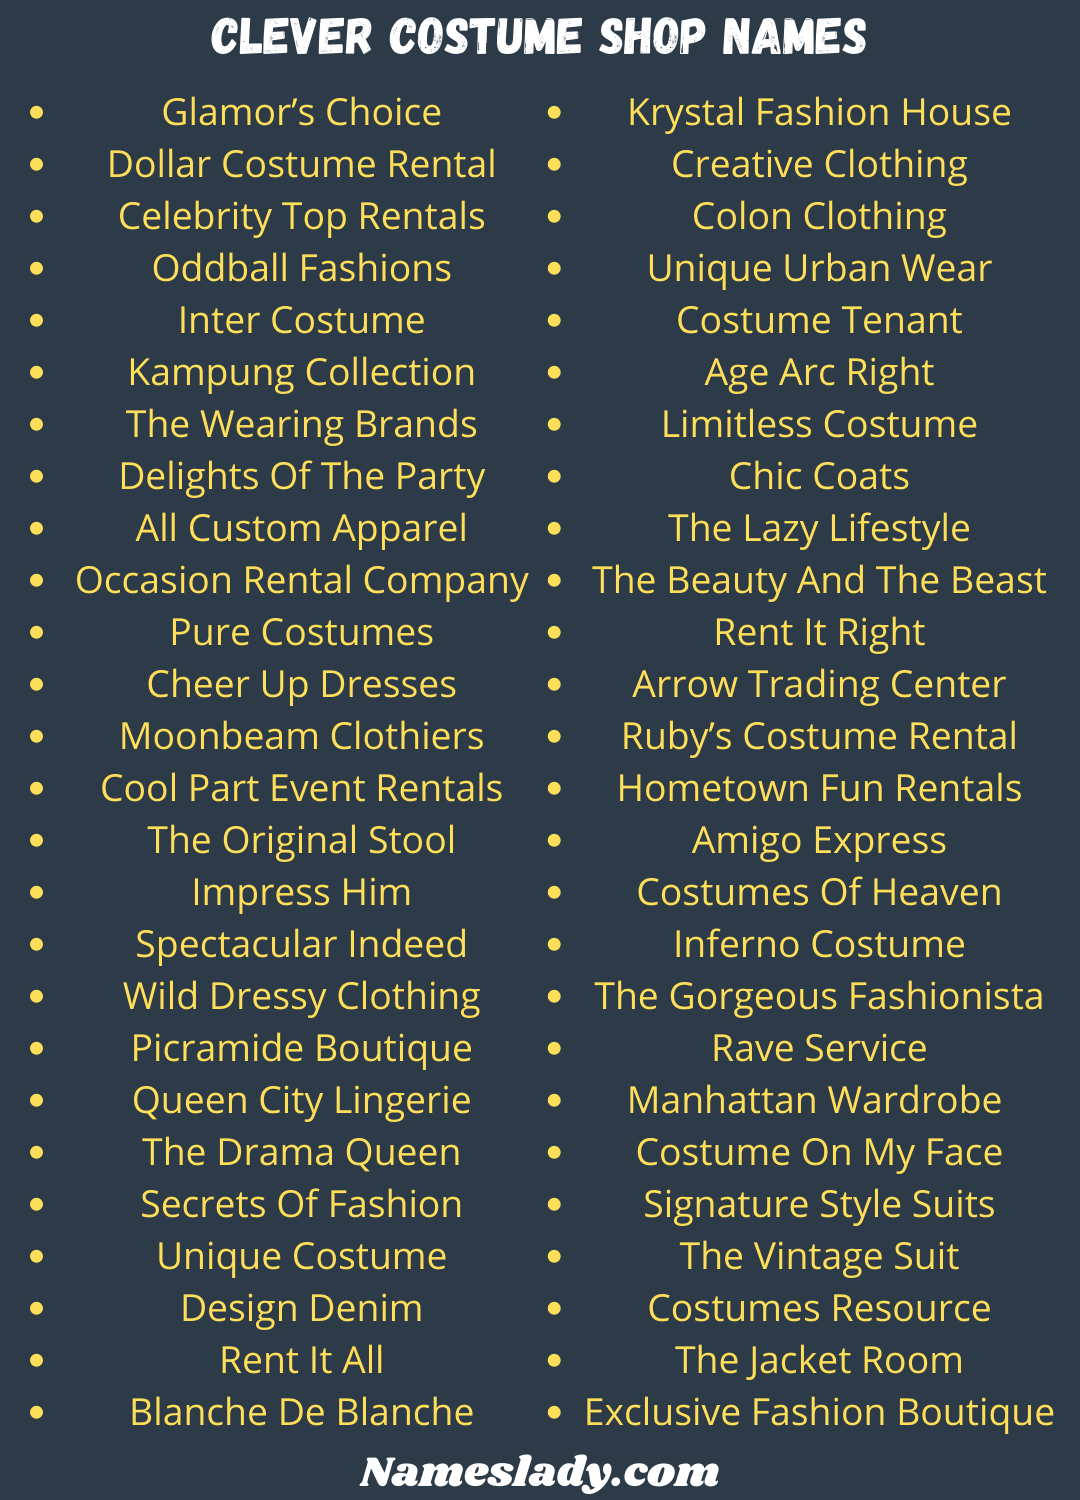 Clever Costume Shop Names